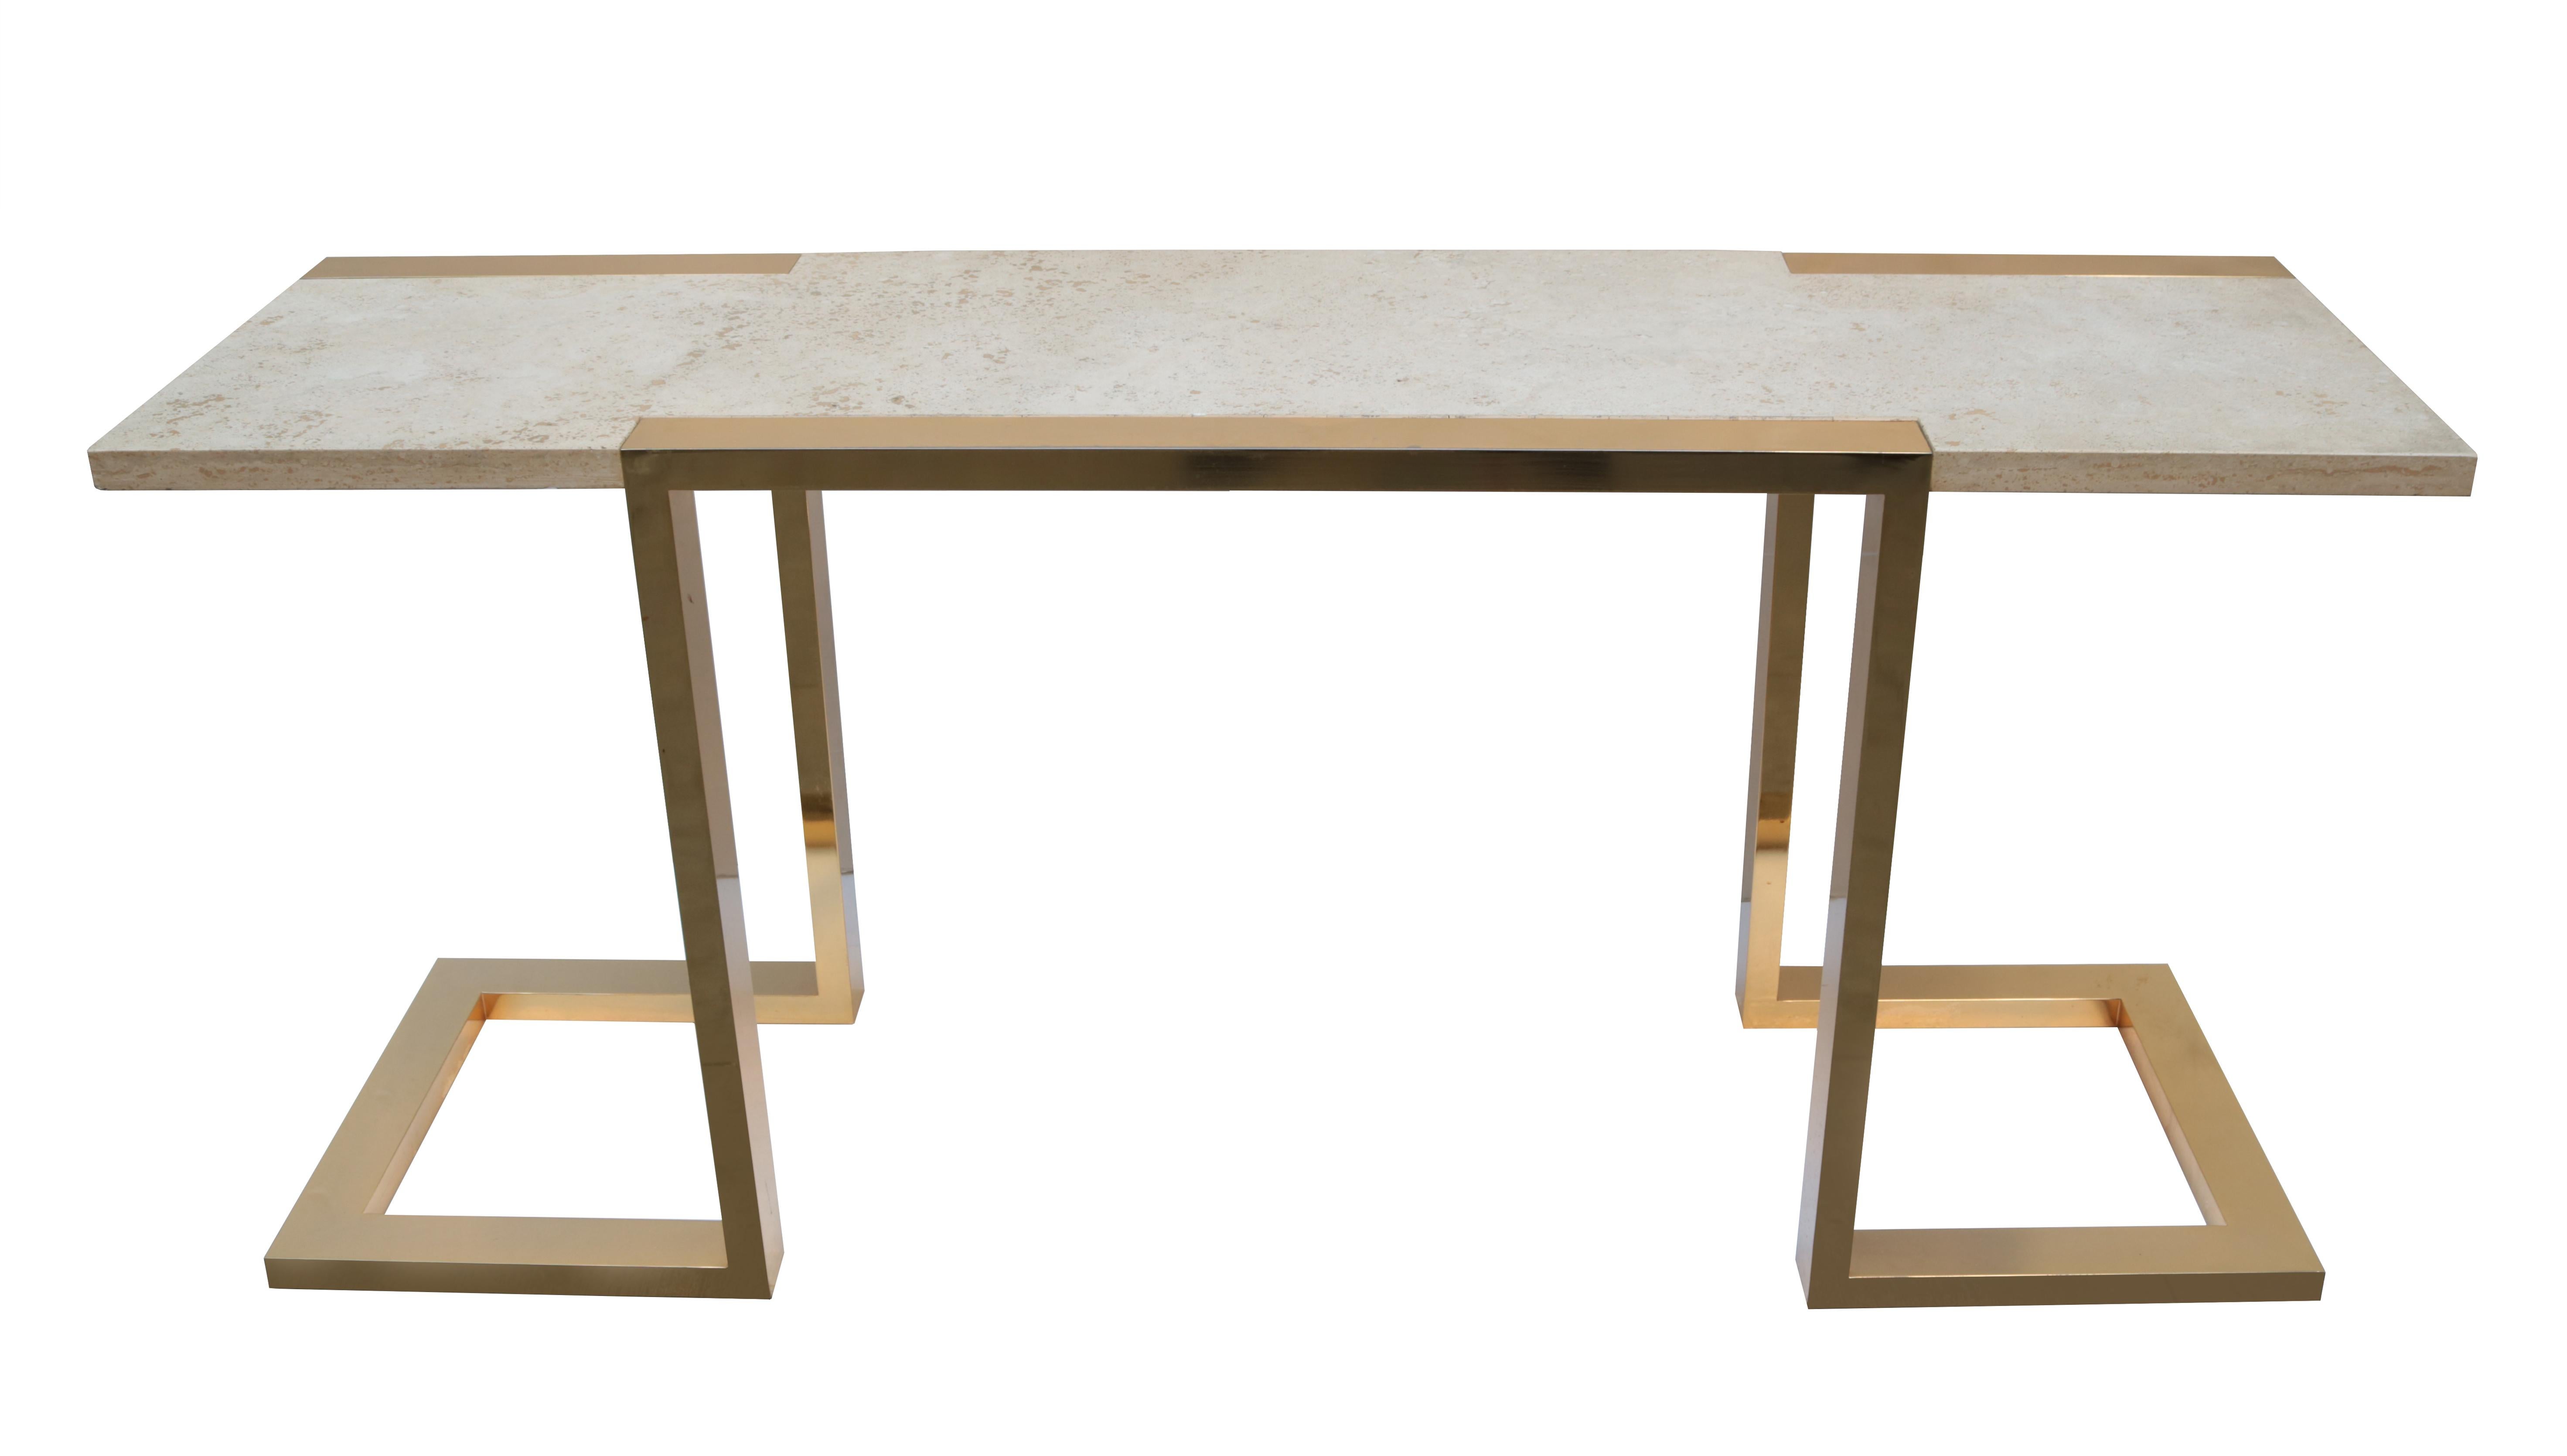 A Modernist console table by Alfredo Freda for Cittone Oggi.
Patinated brass frame and travertine top.